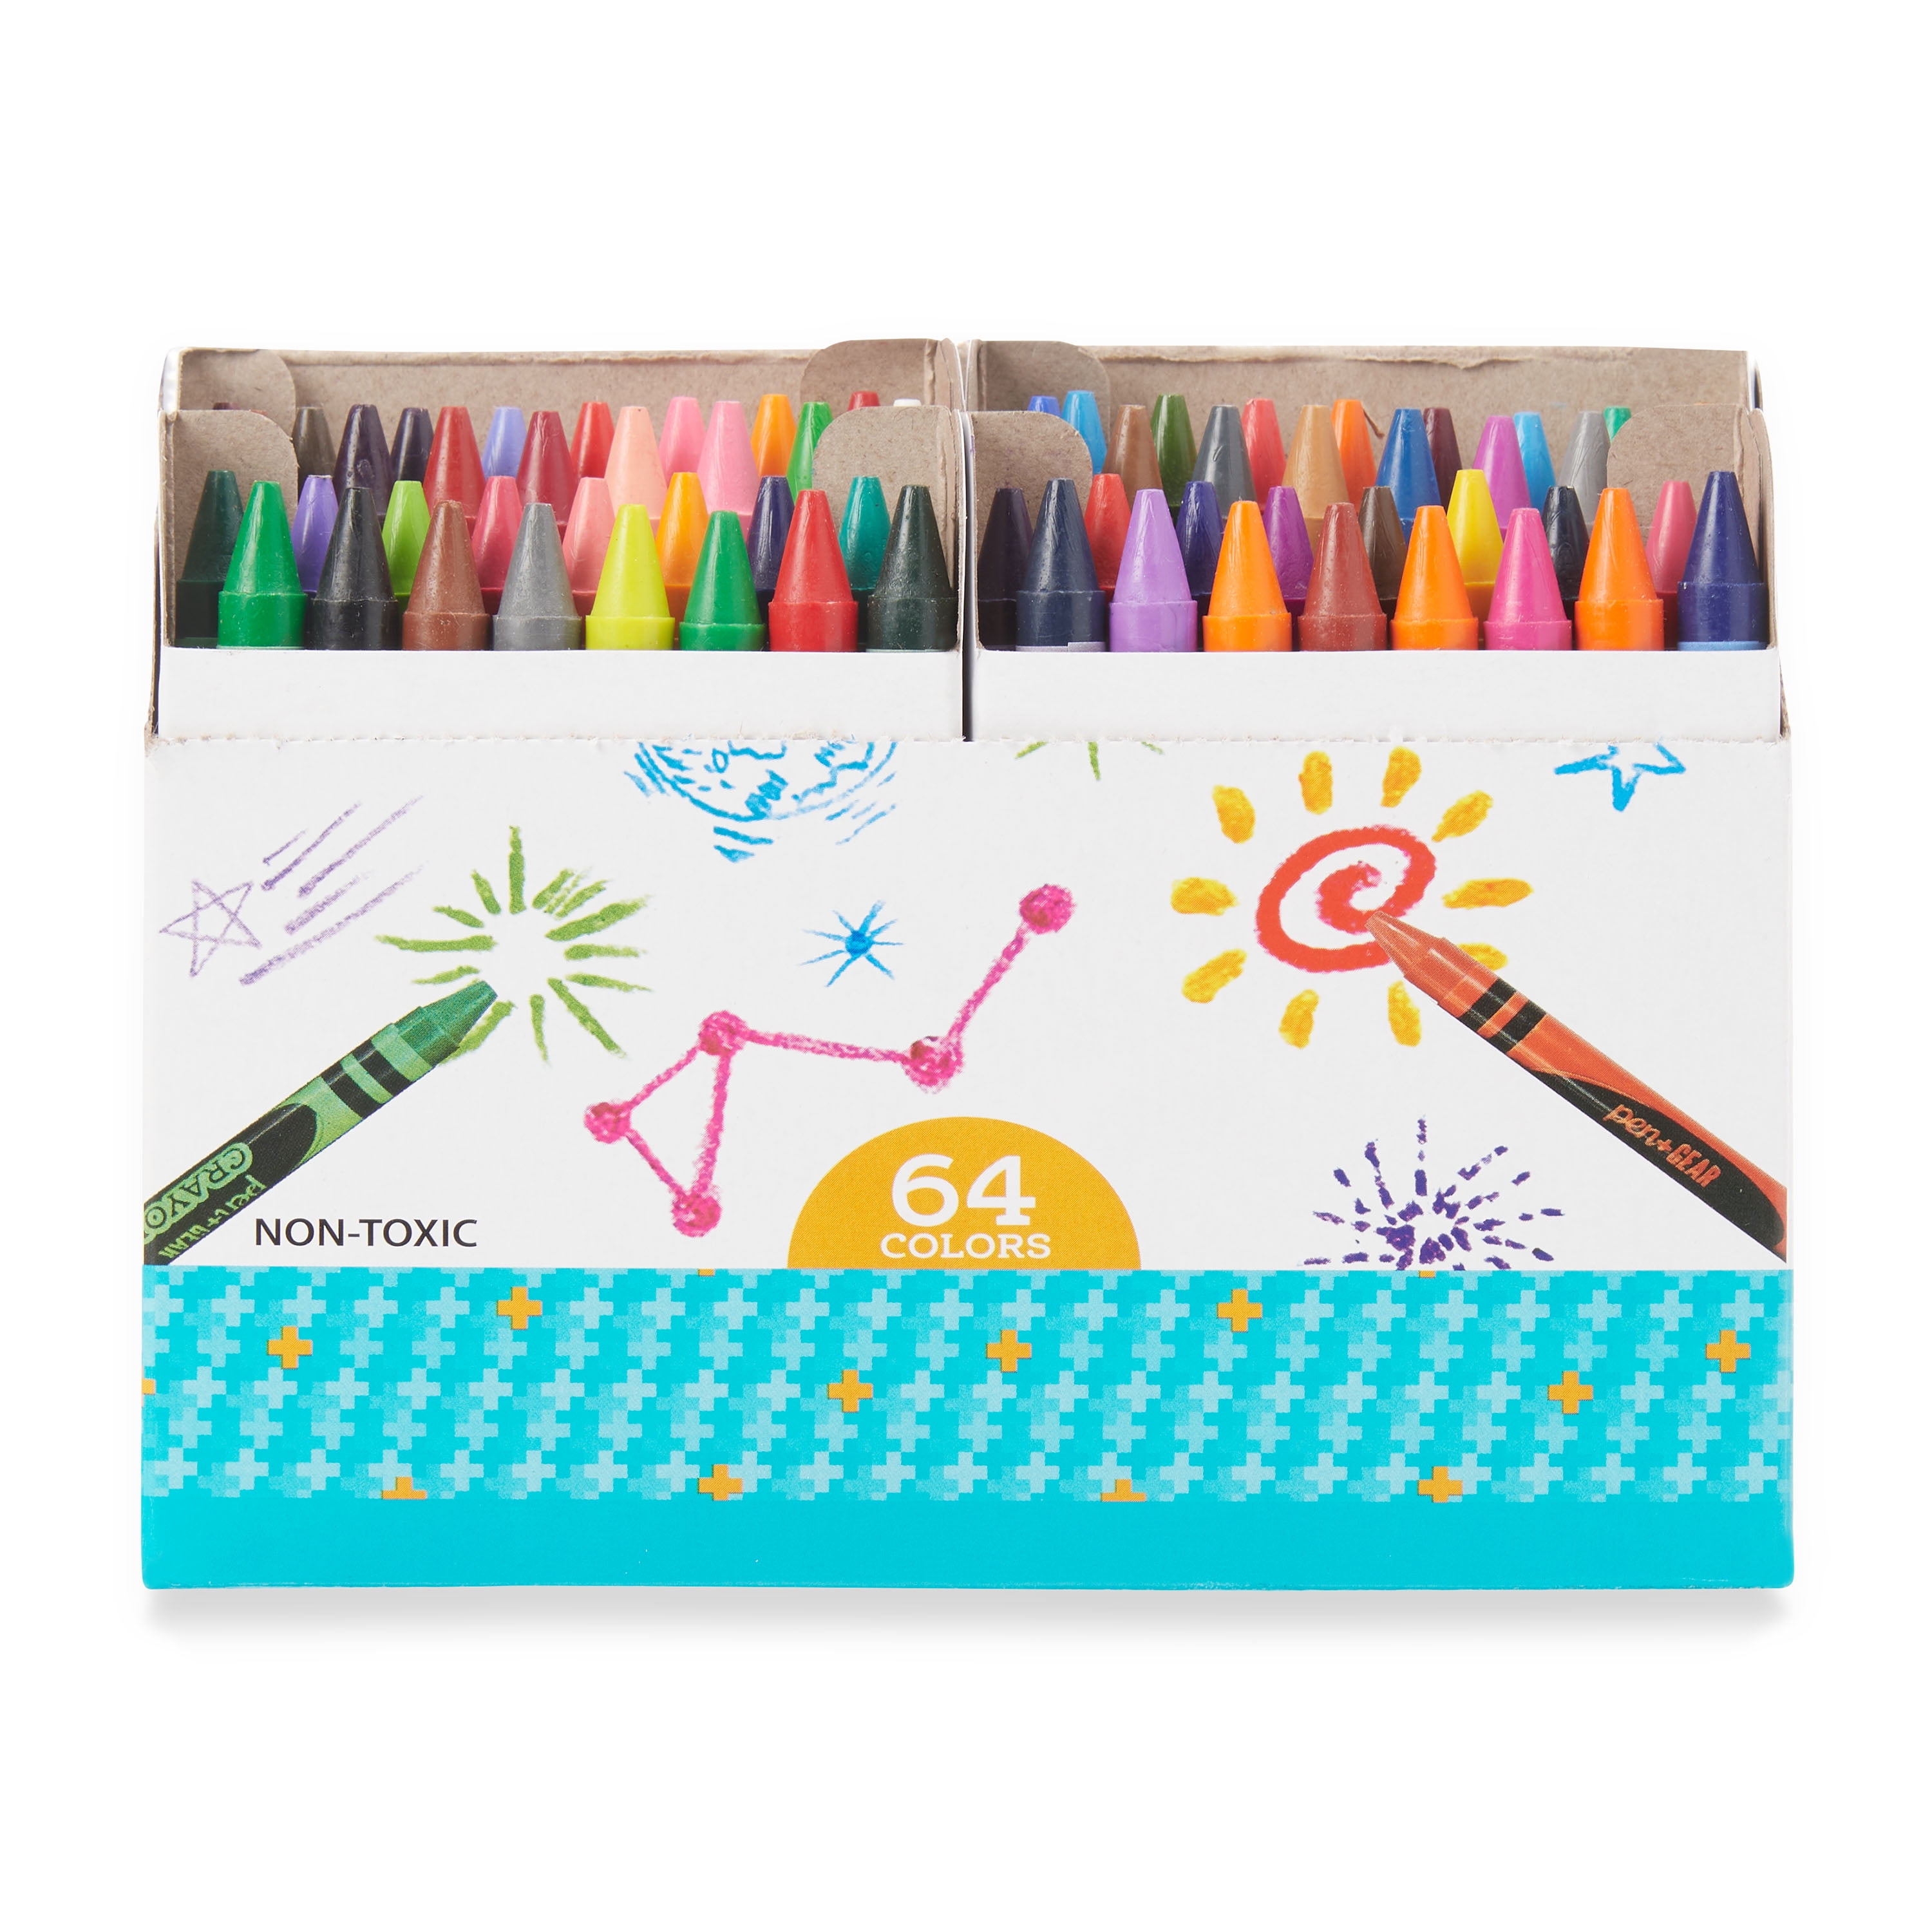 Pen+gear Classic Crayons, Built in Sharpener, 64 Count, Size: Dimater 3.15inch Length 3.54inch